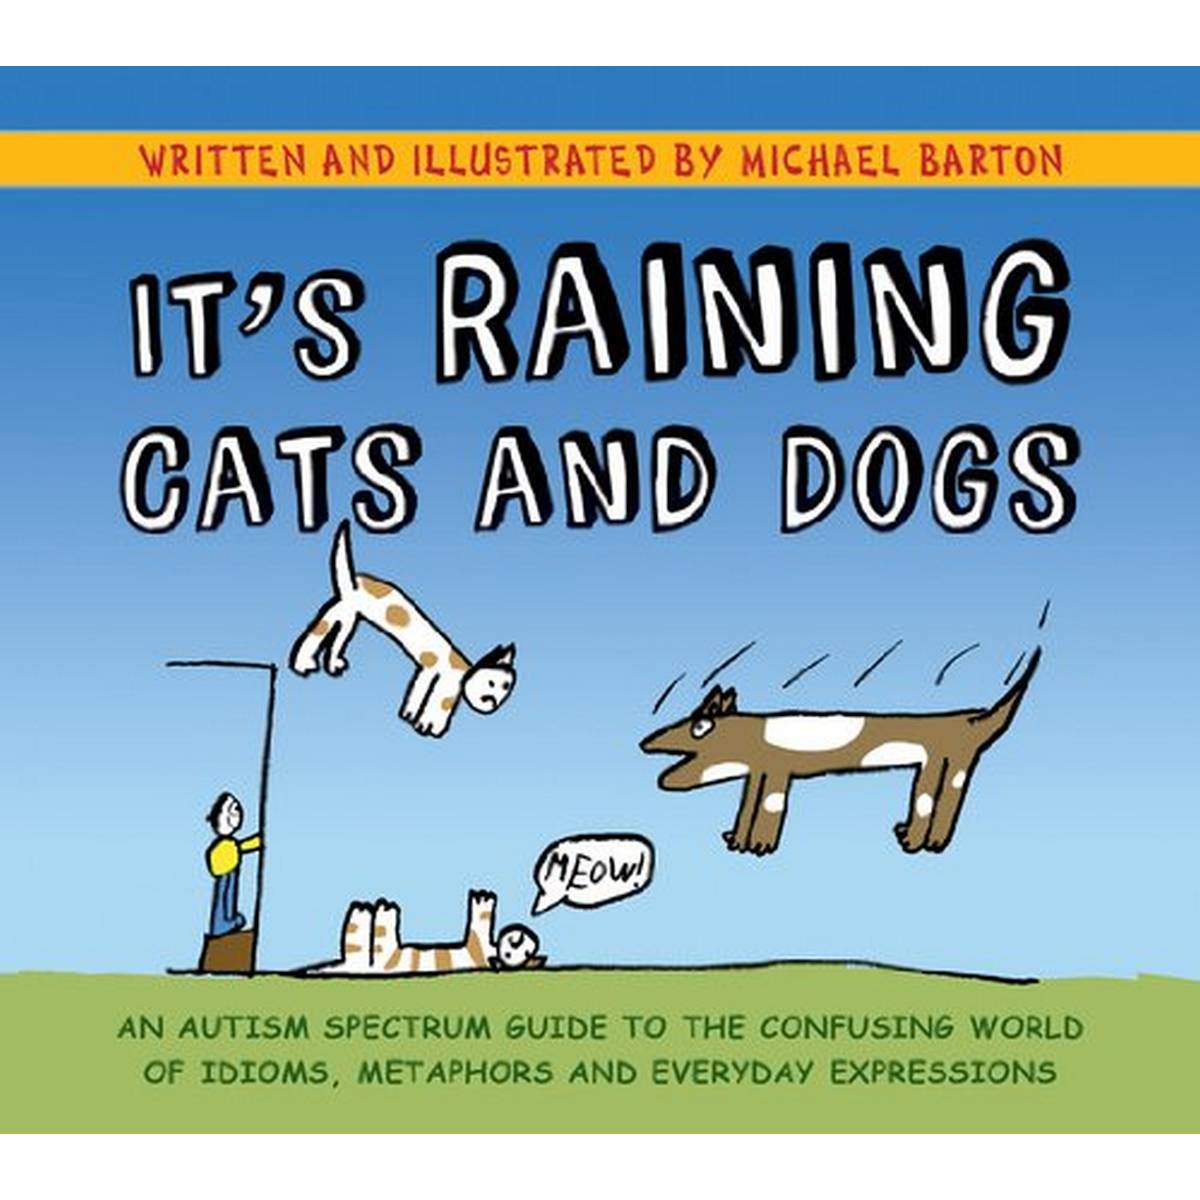 It's Raining Cats and Dogs